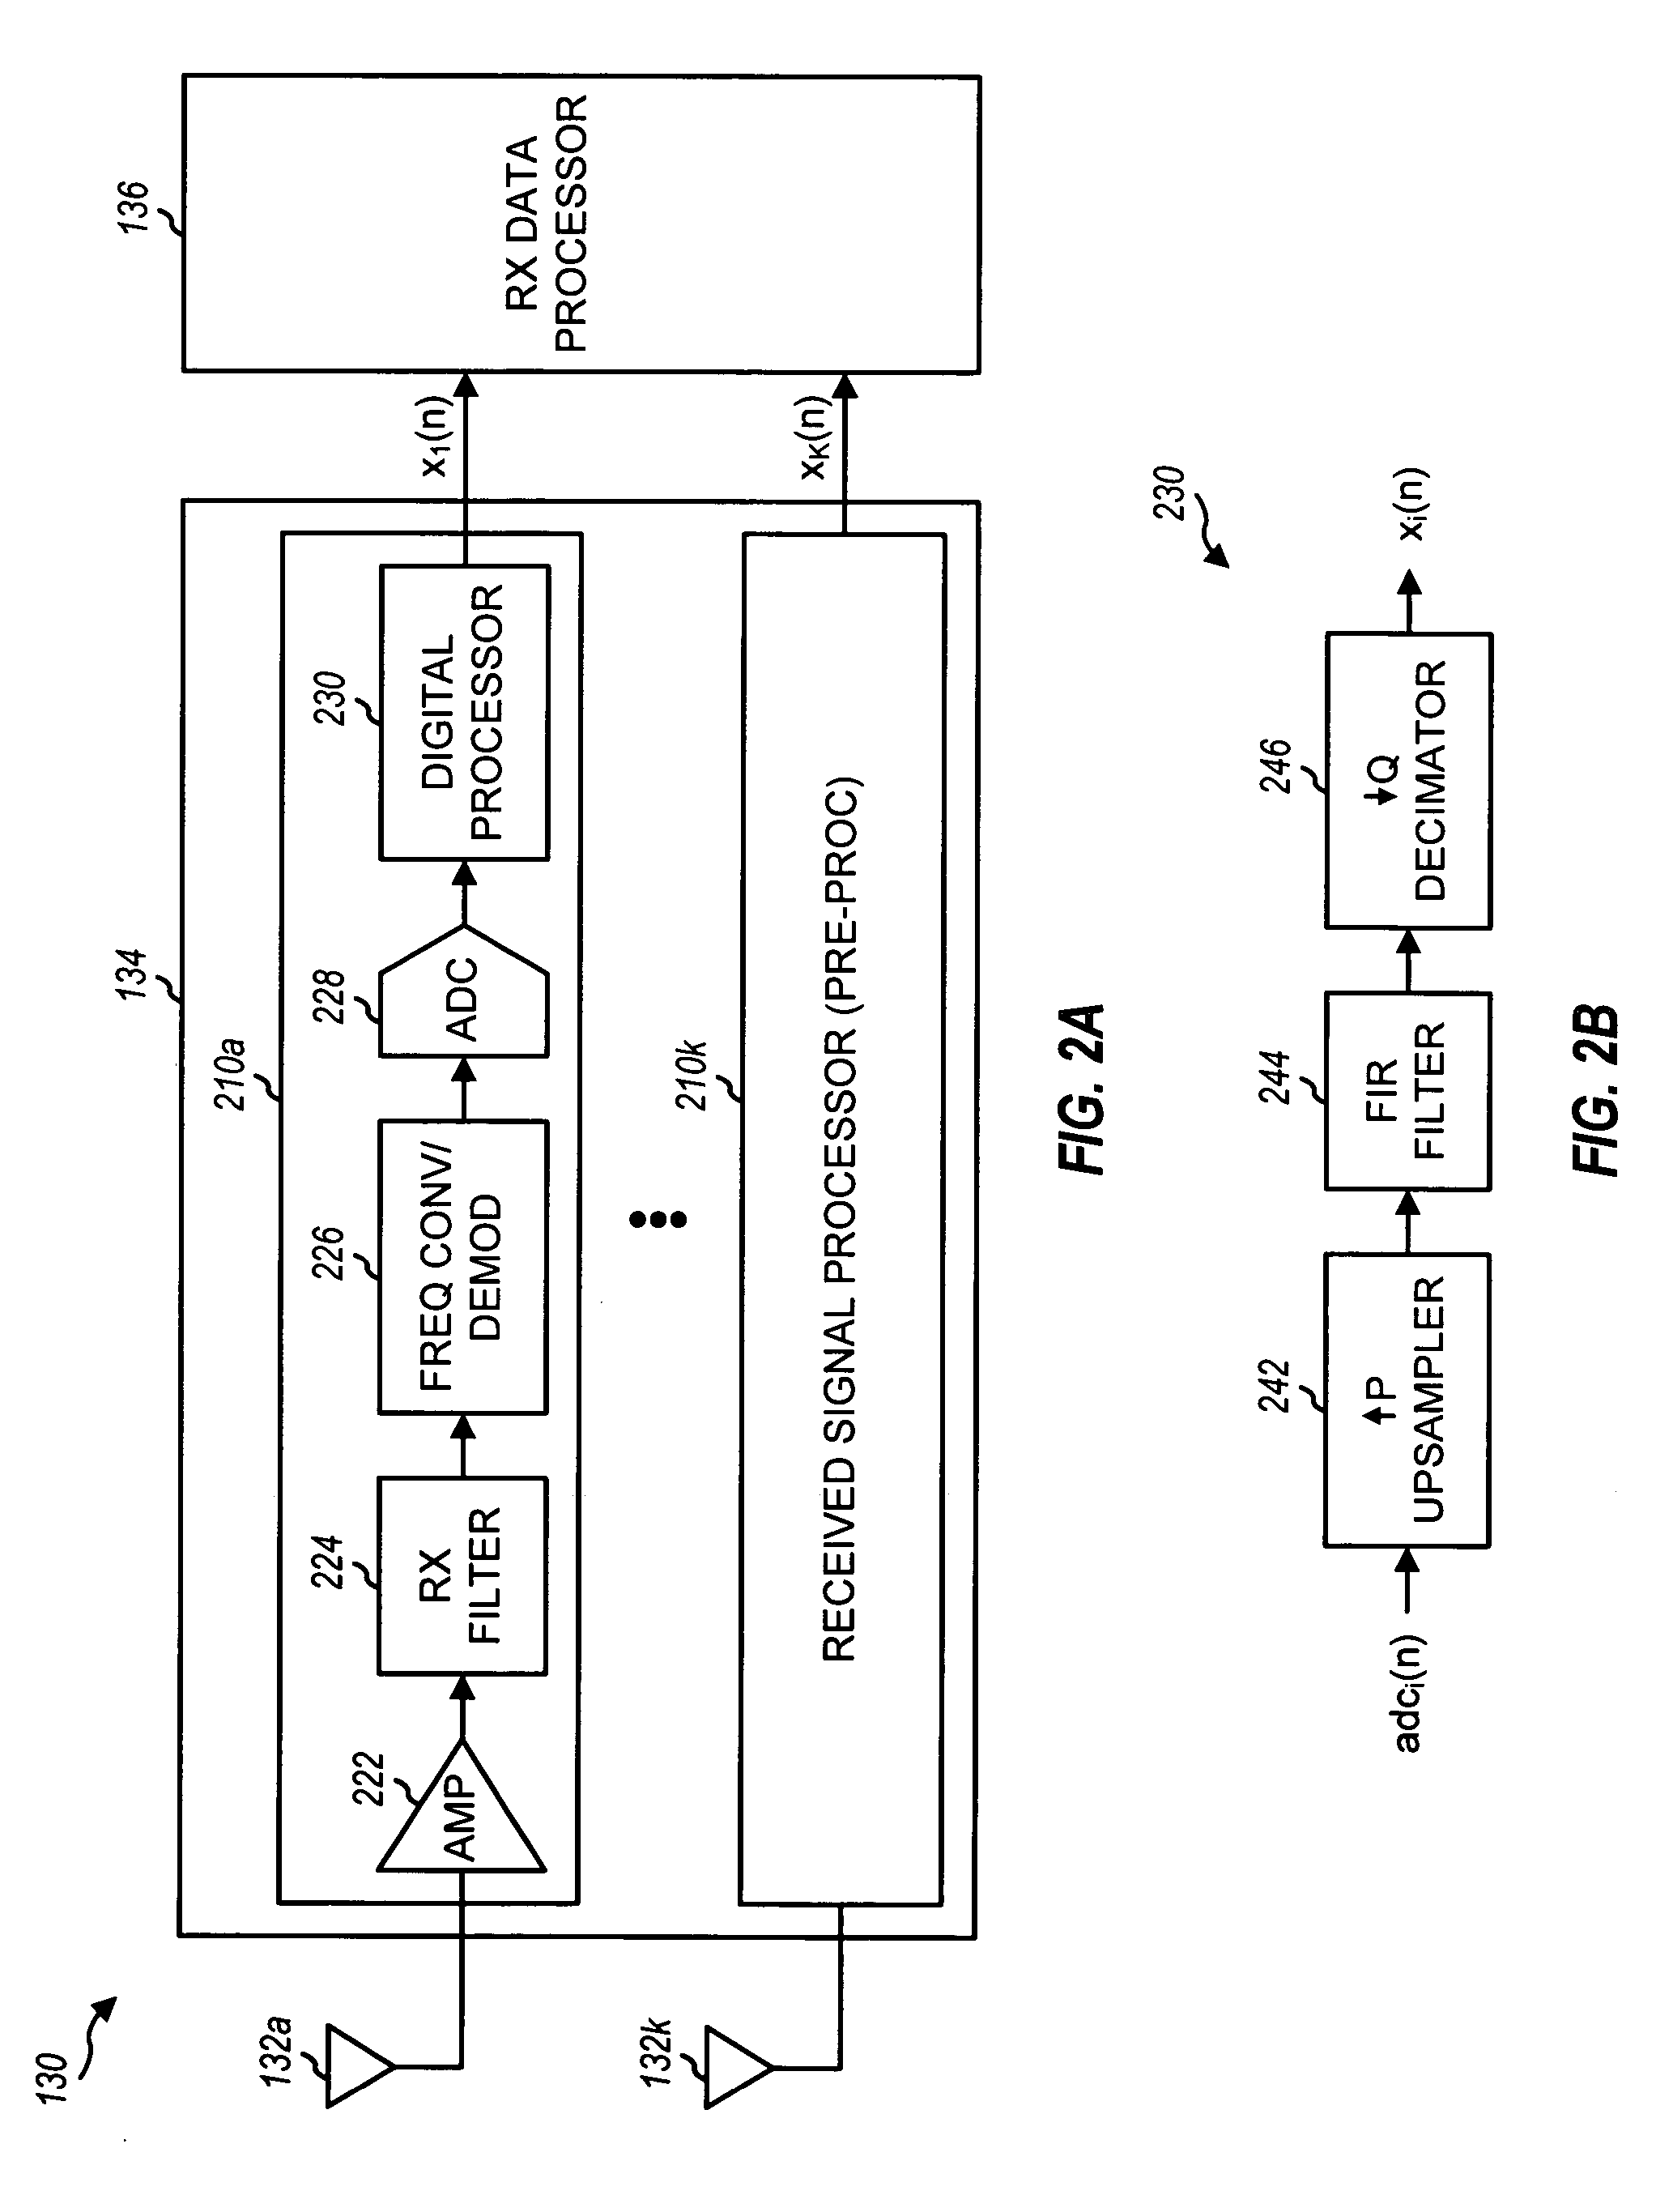 Method and apparatus for processing a modulated signal using an equalizer and a rake receiver